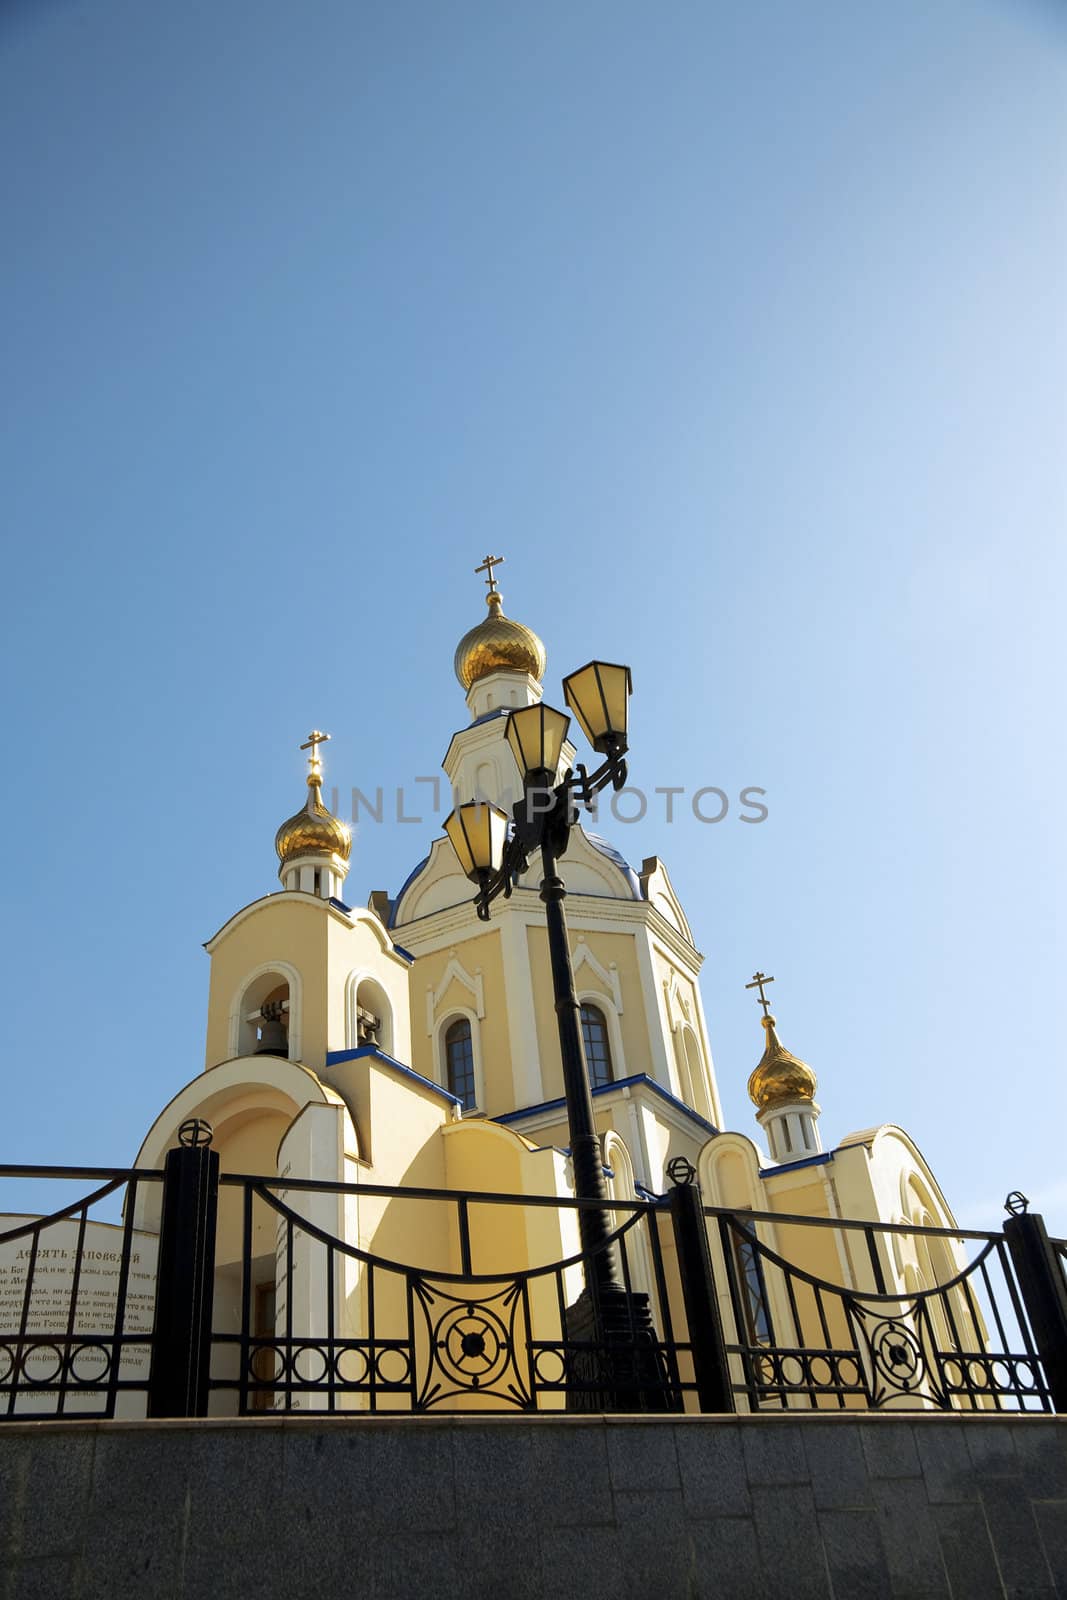 russian christian church with gold domes